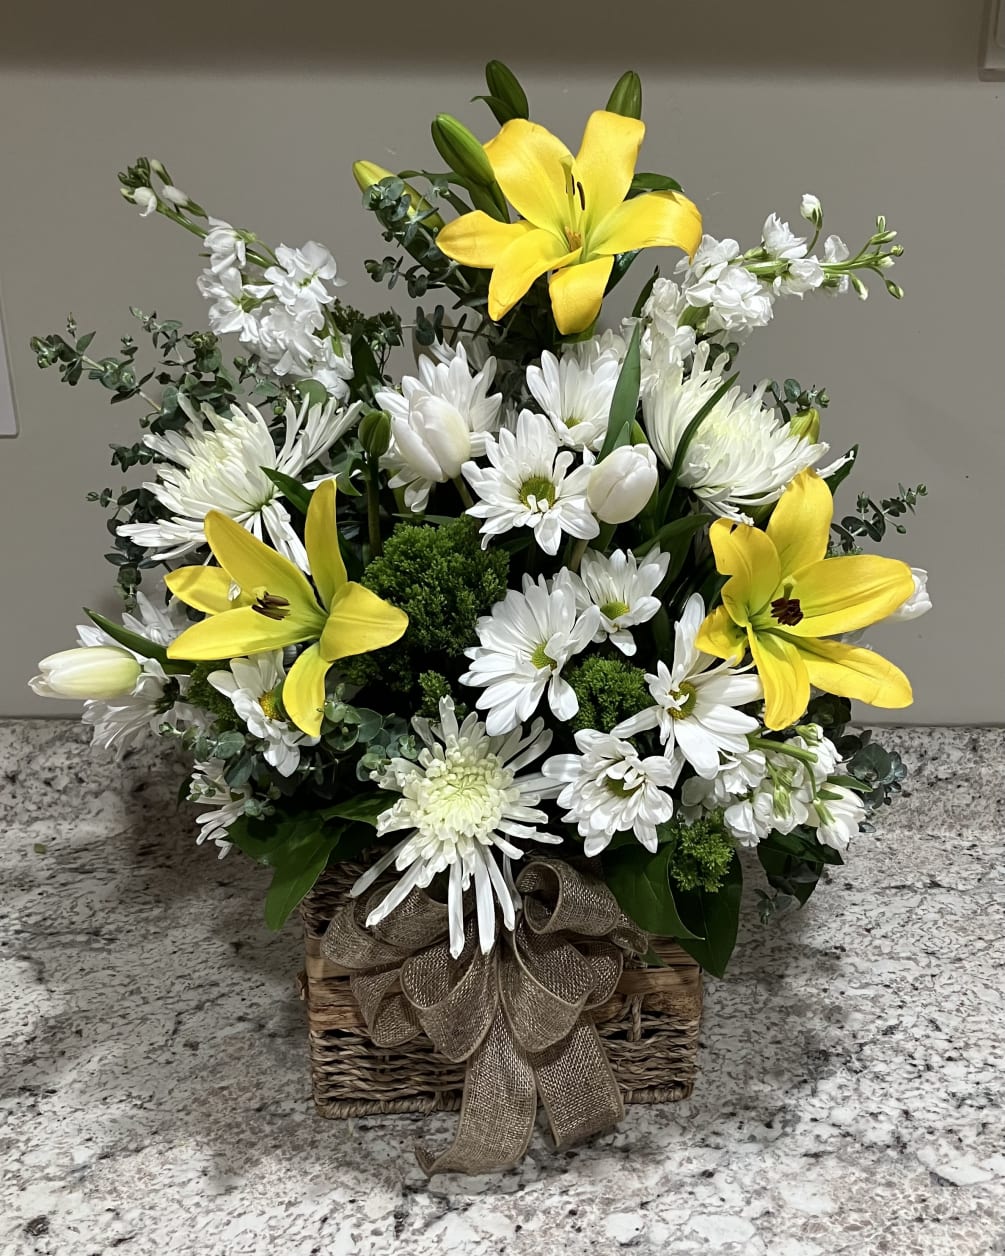 A cute basket of yellow Lilies and white Daisies.